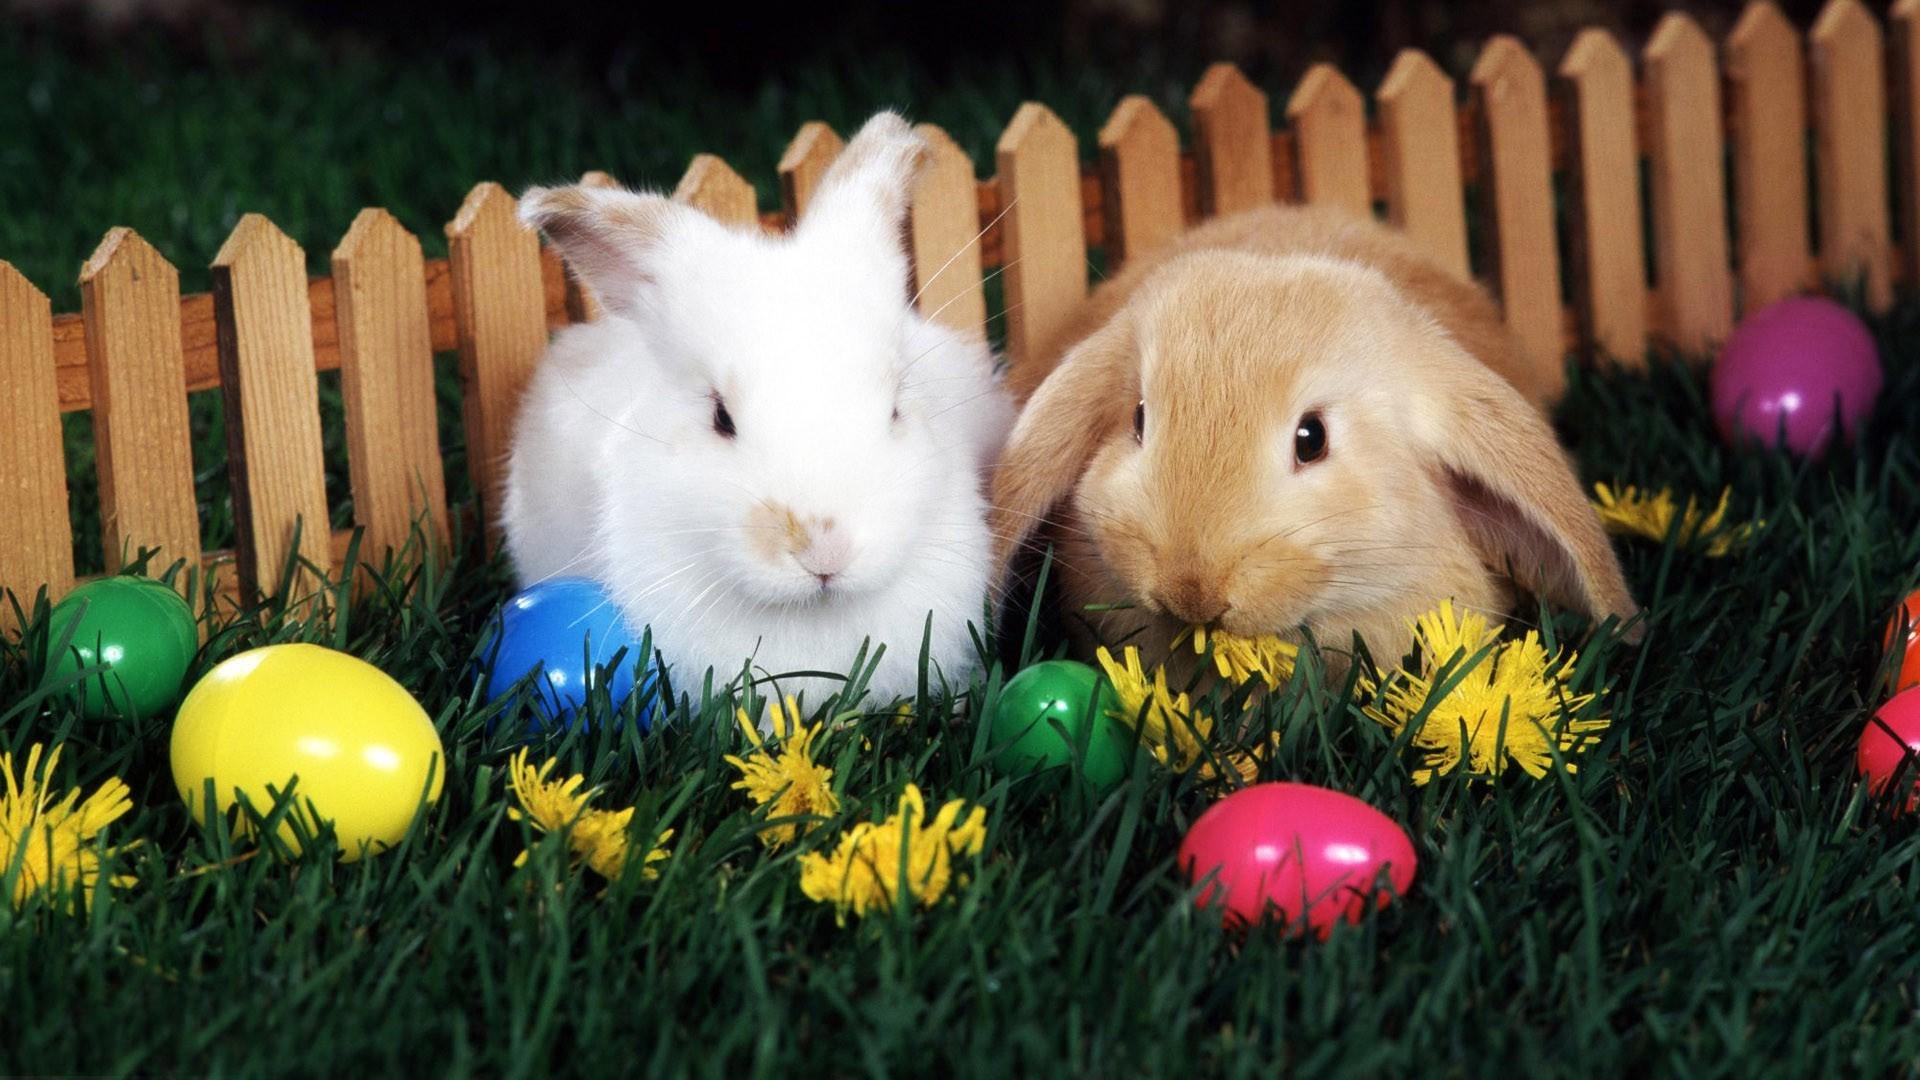 Download 1920x1080 Easter bunnies and eggs wallpaper